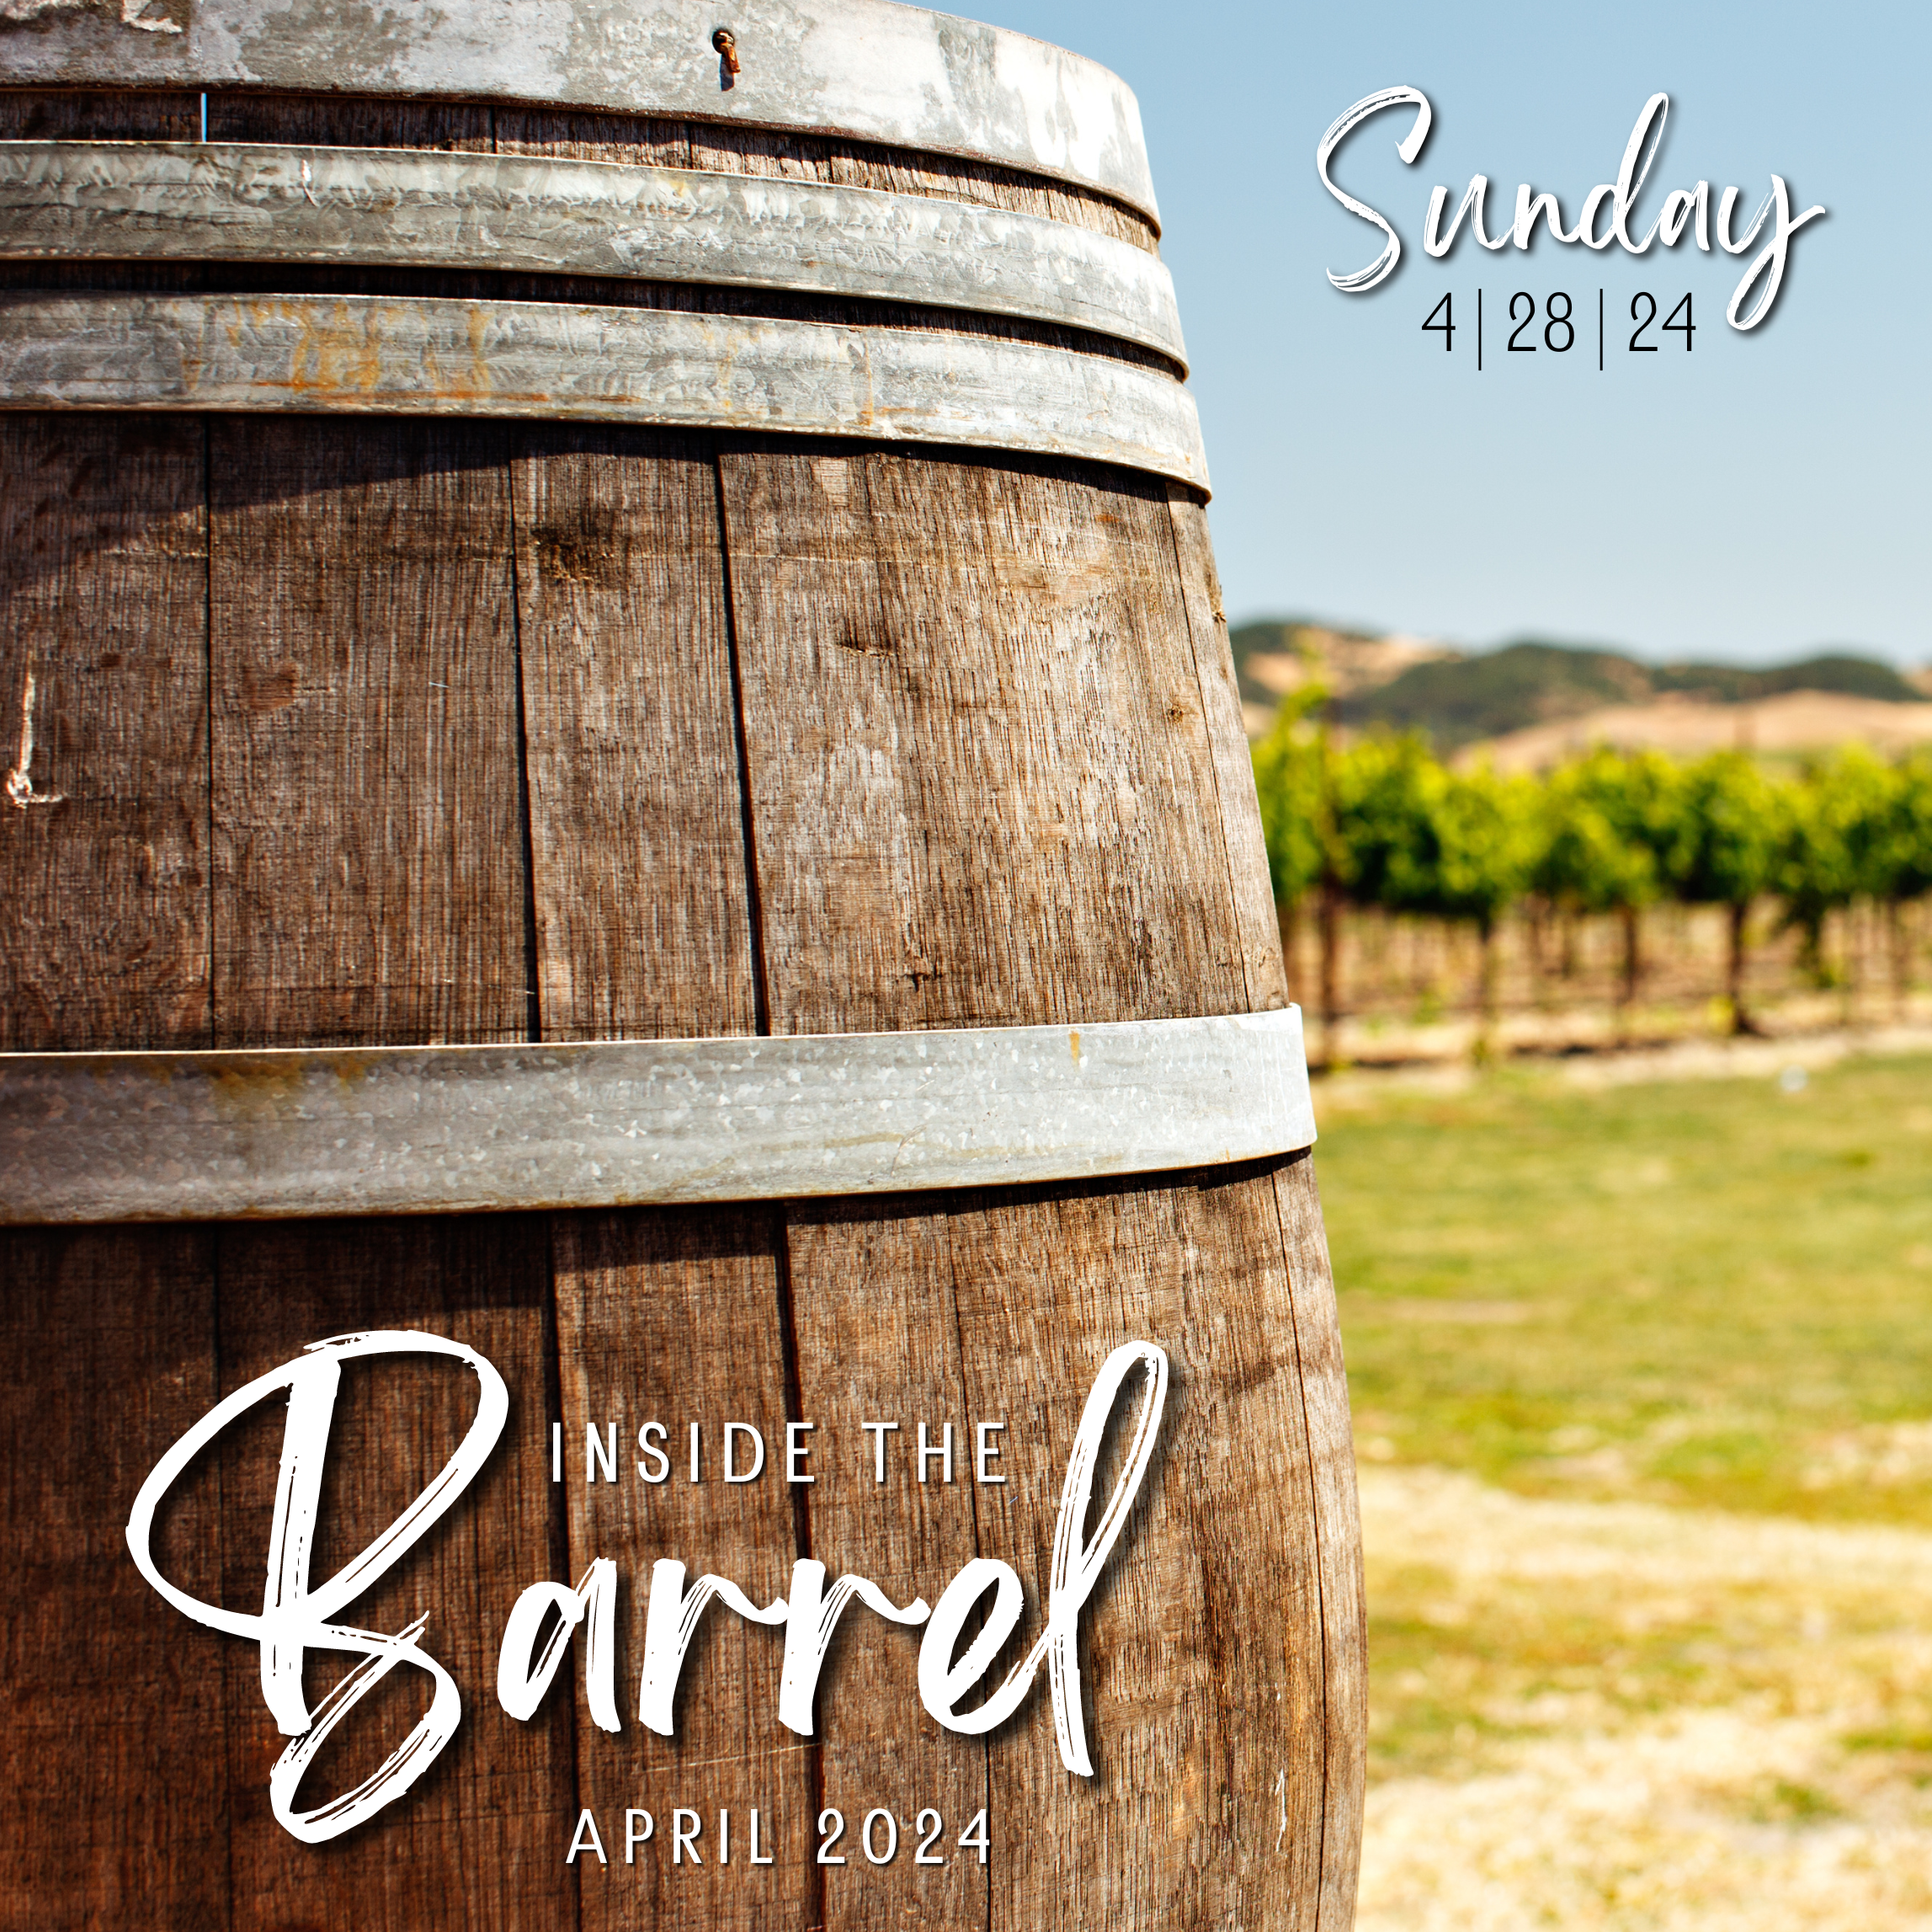 Product Image for Inside the Barrel Sunday, April 28th